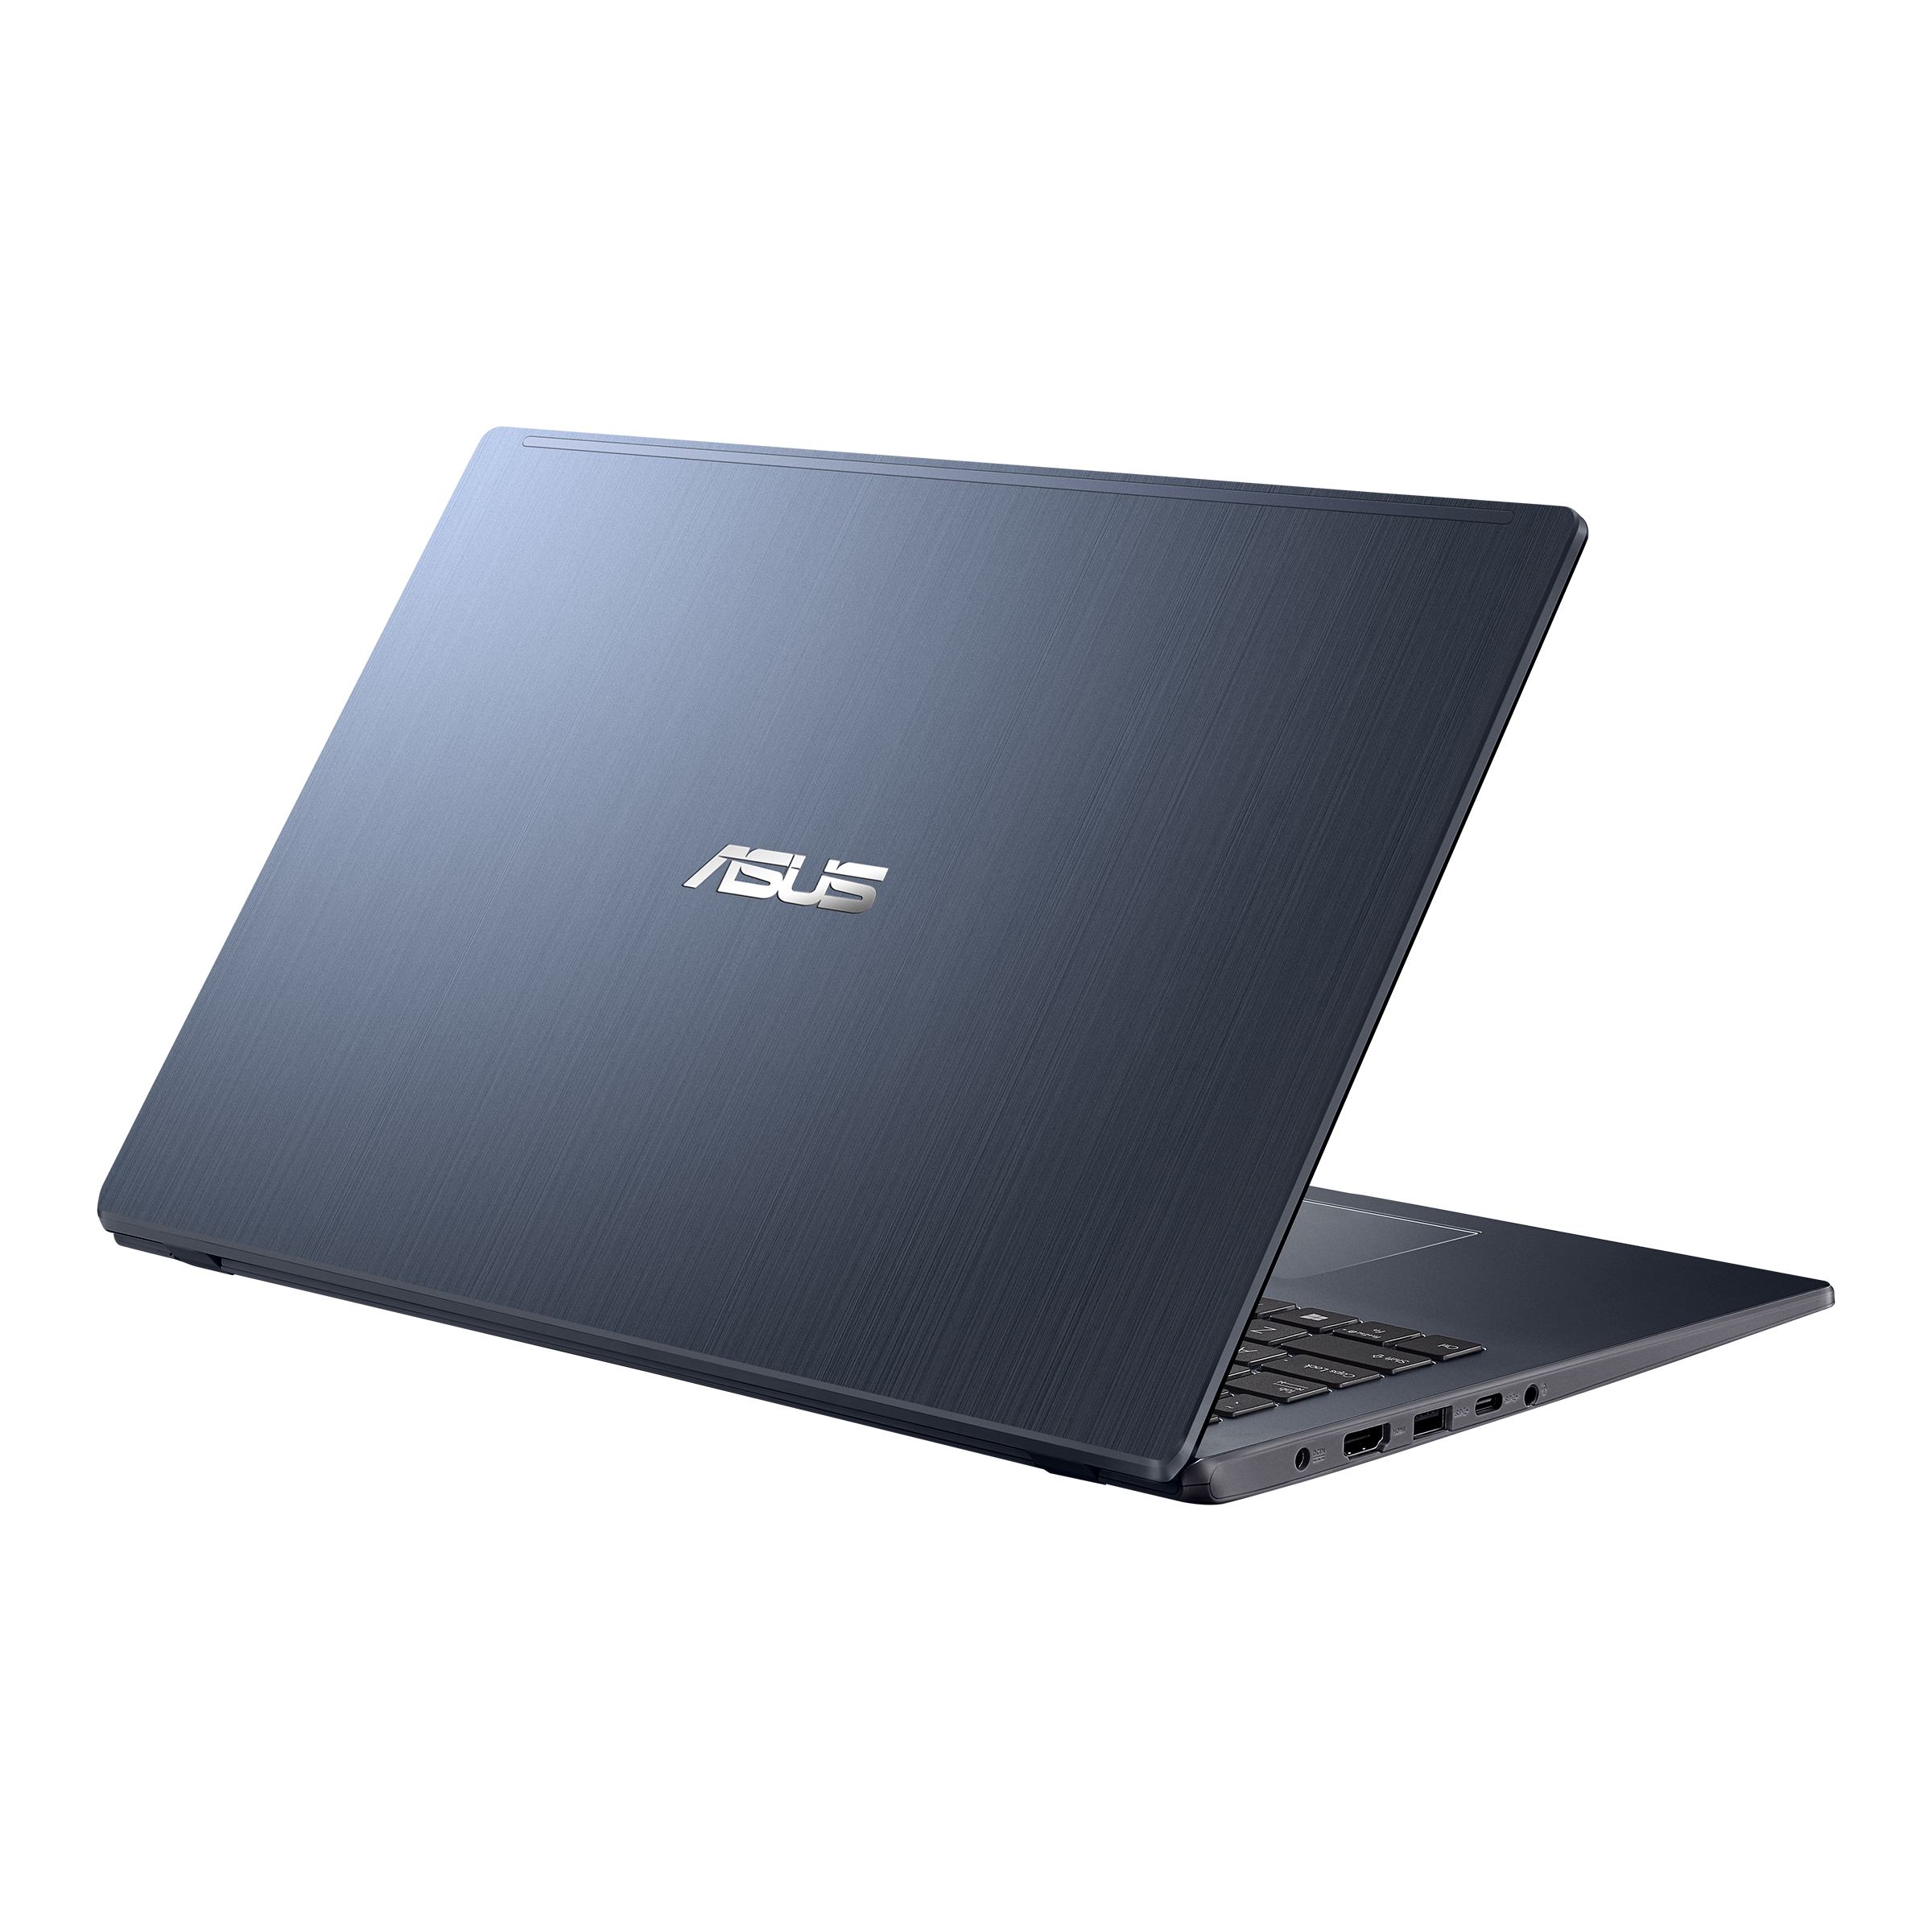 ASUS E510｜Laptops For Home｜ASUS Global